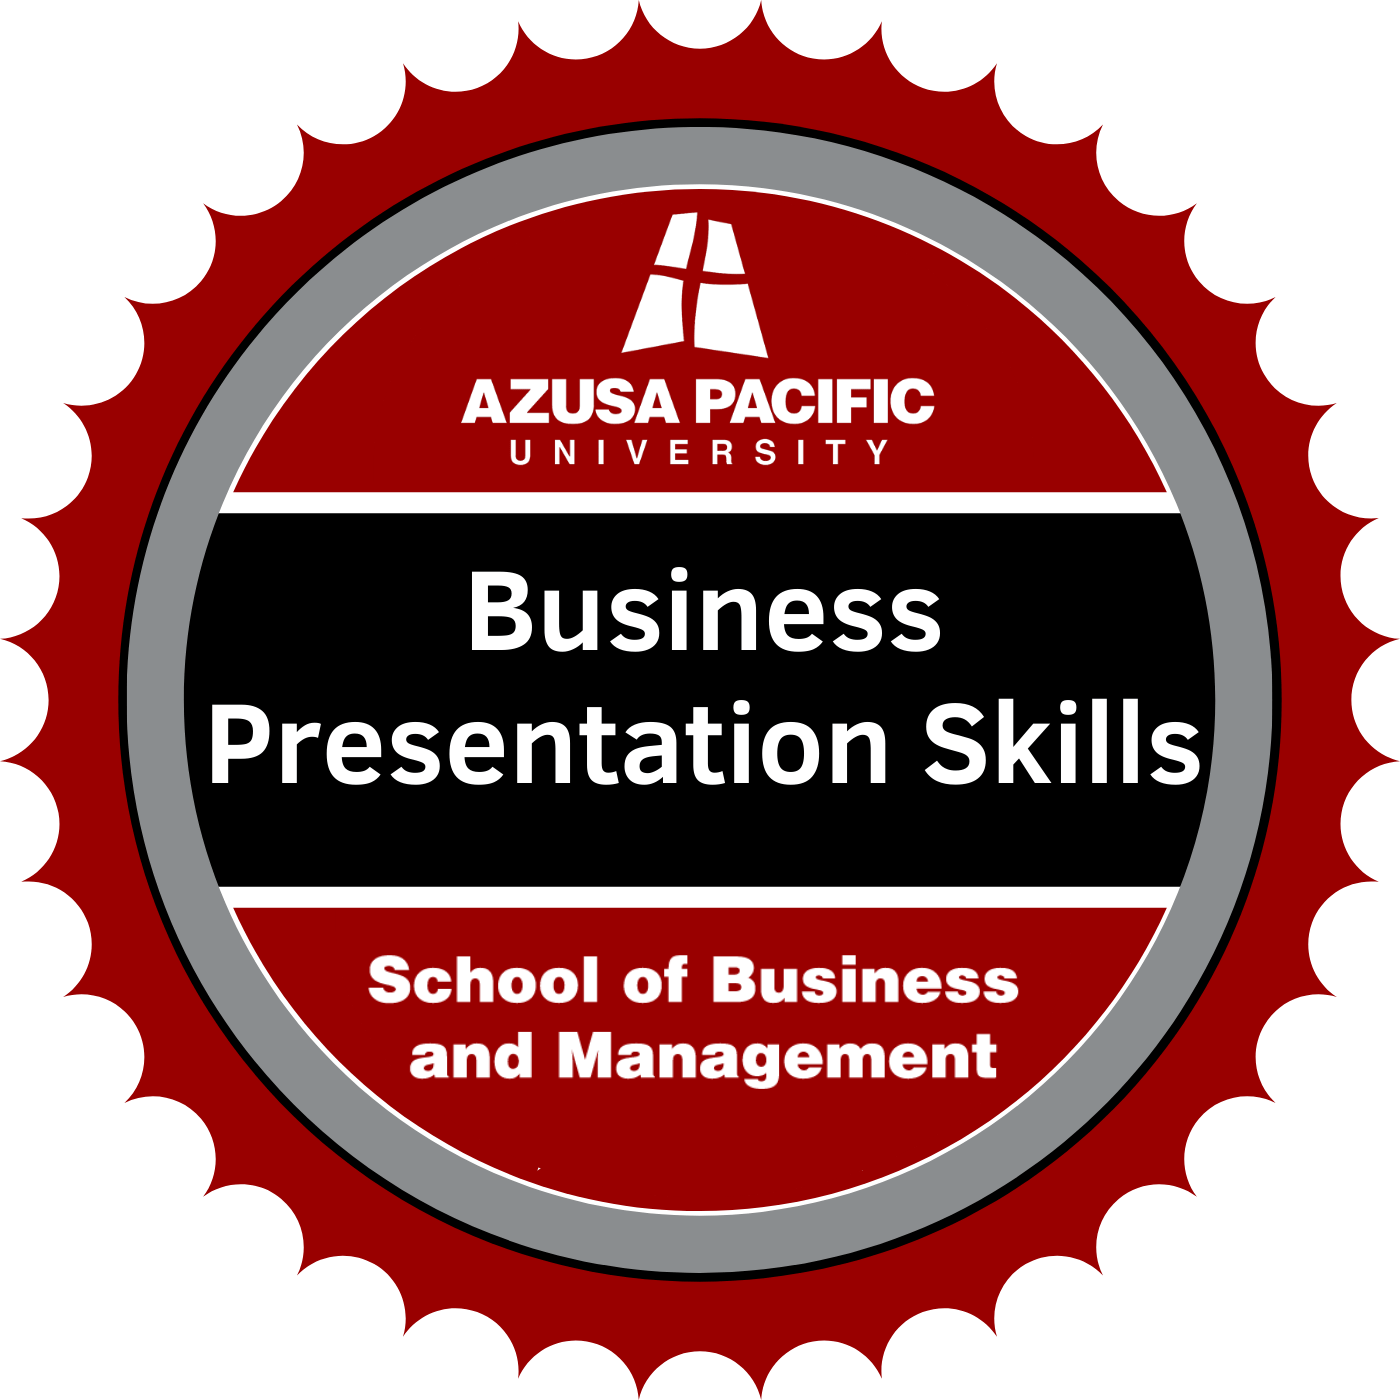 Business Presentation Skills badge that can be earned after completing the course